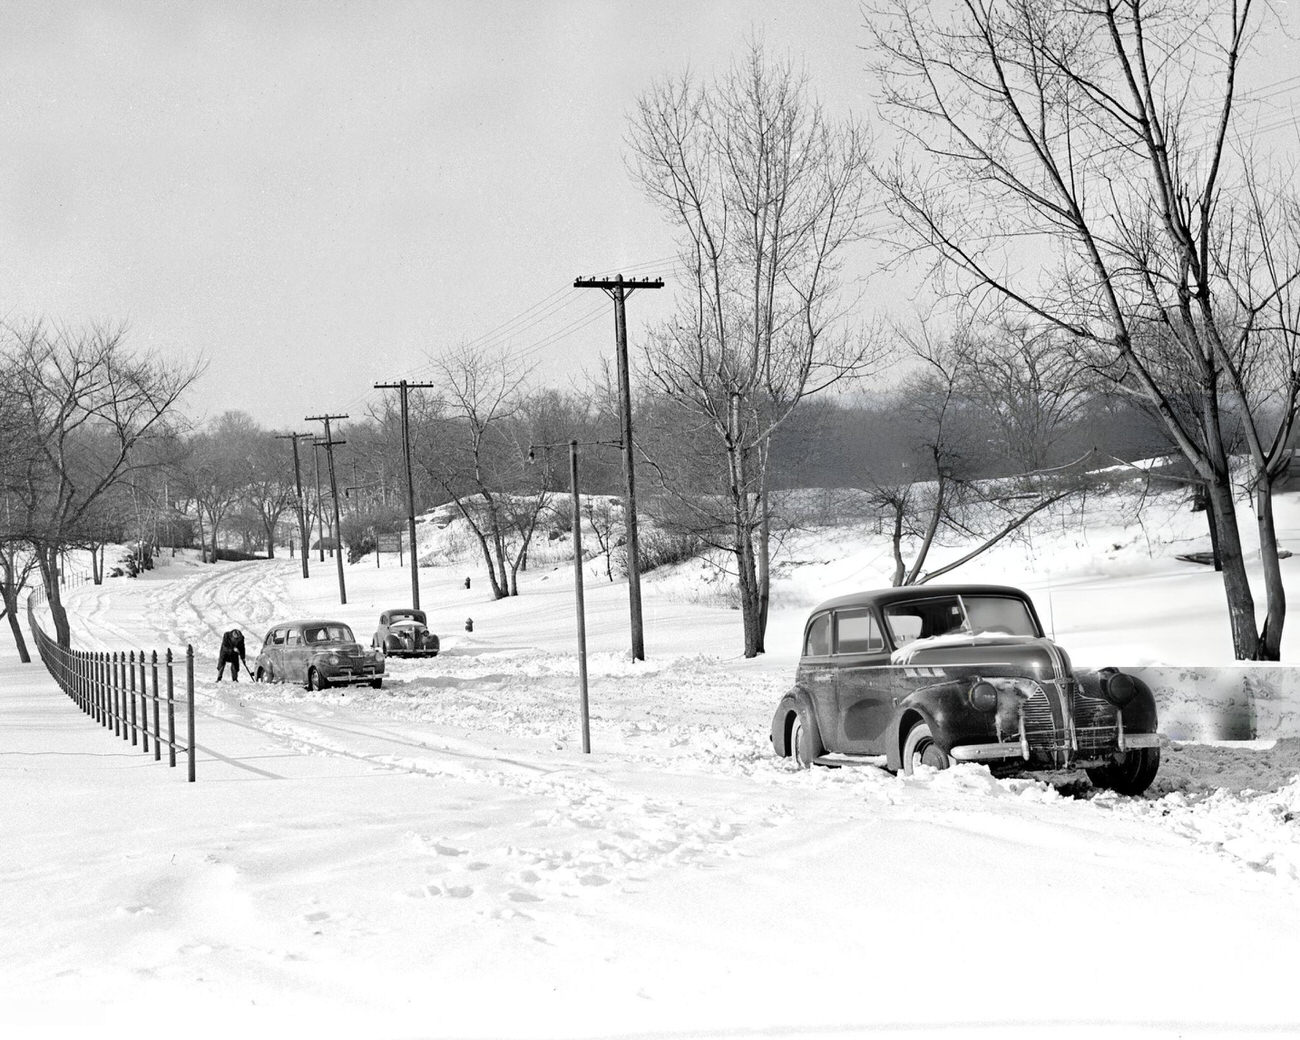 Drivers Struggle To Find The Boston Post Road Under A Blanket Of Snow, 1940S